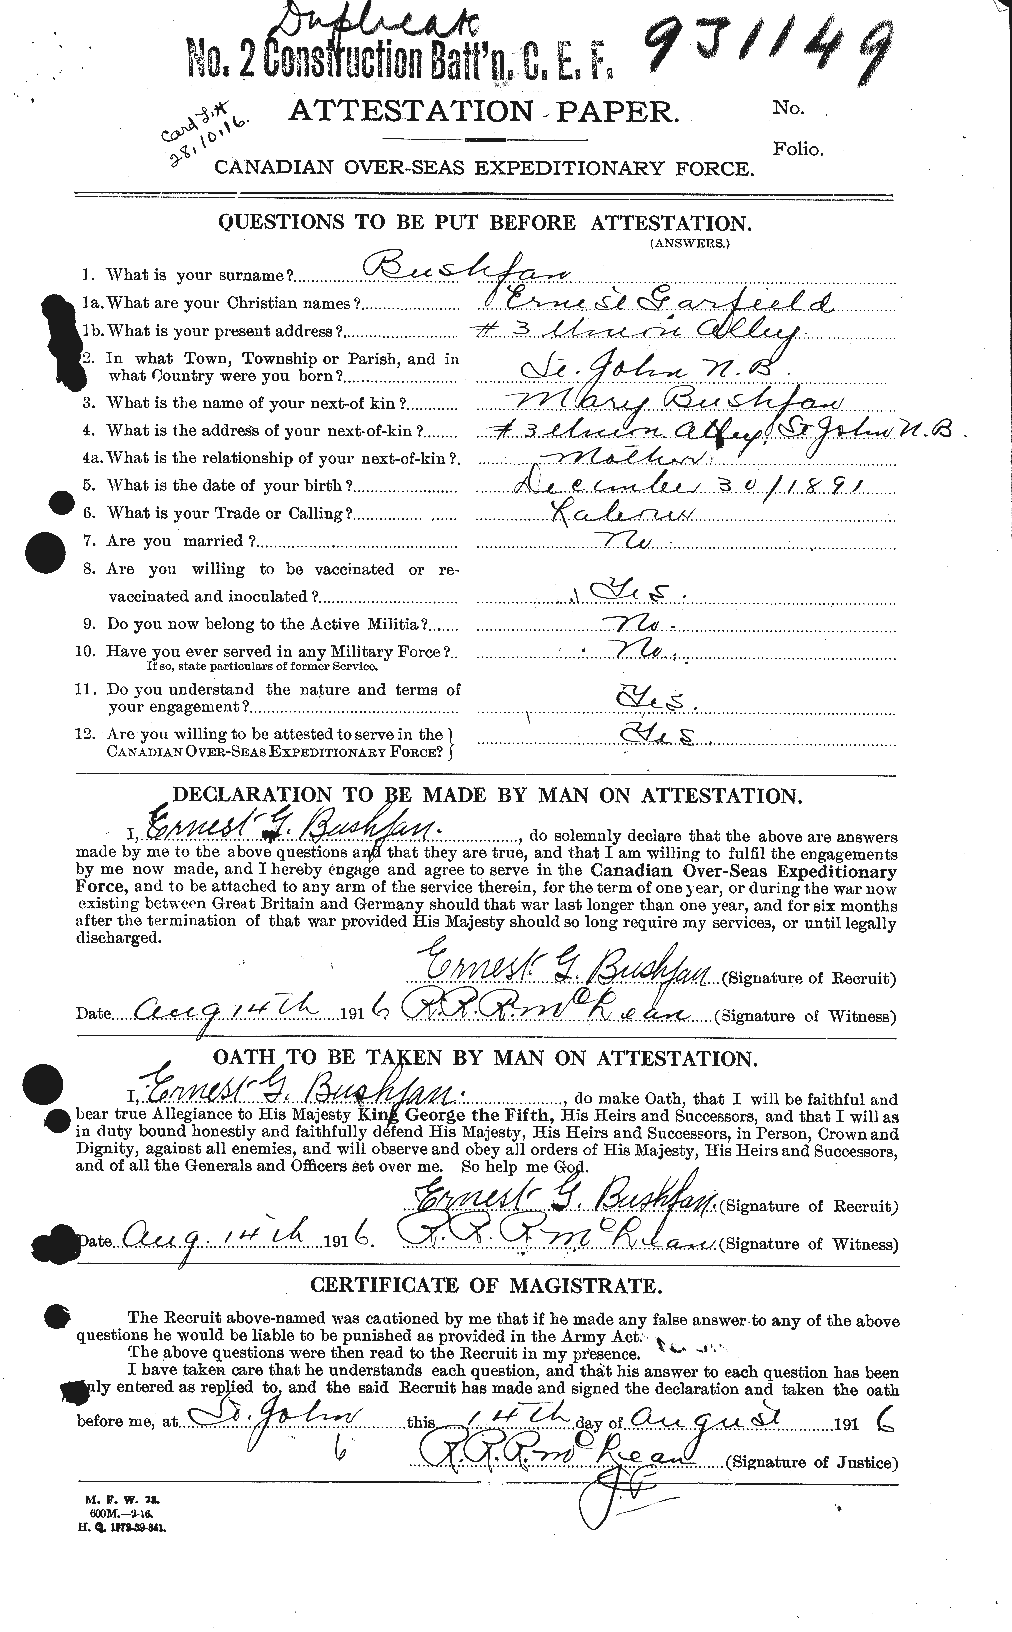 Personnel Records of the First World War - CEF 274510a